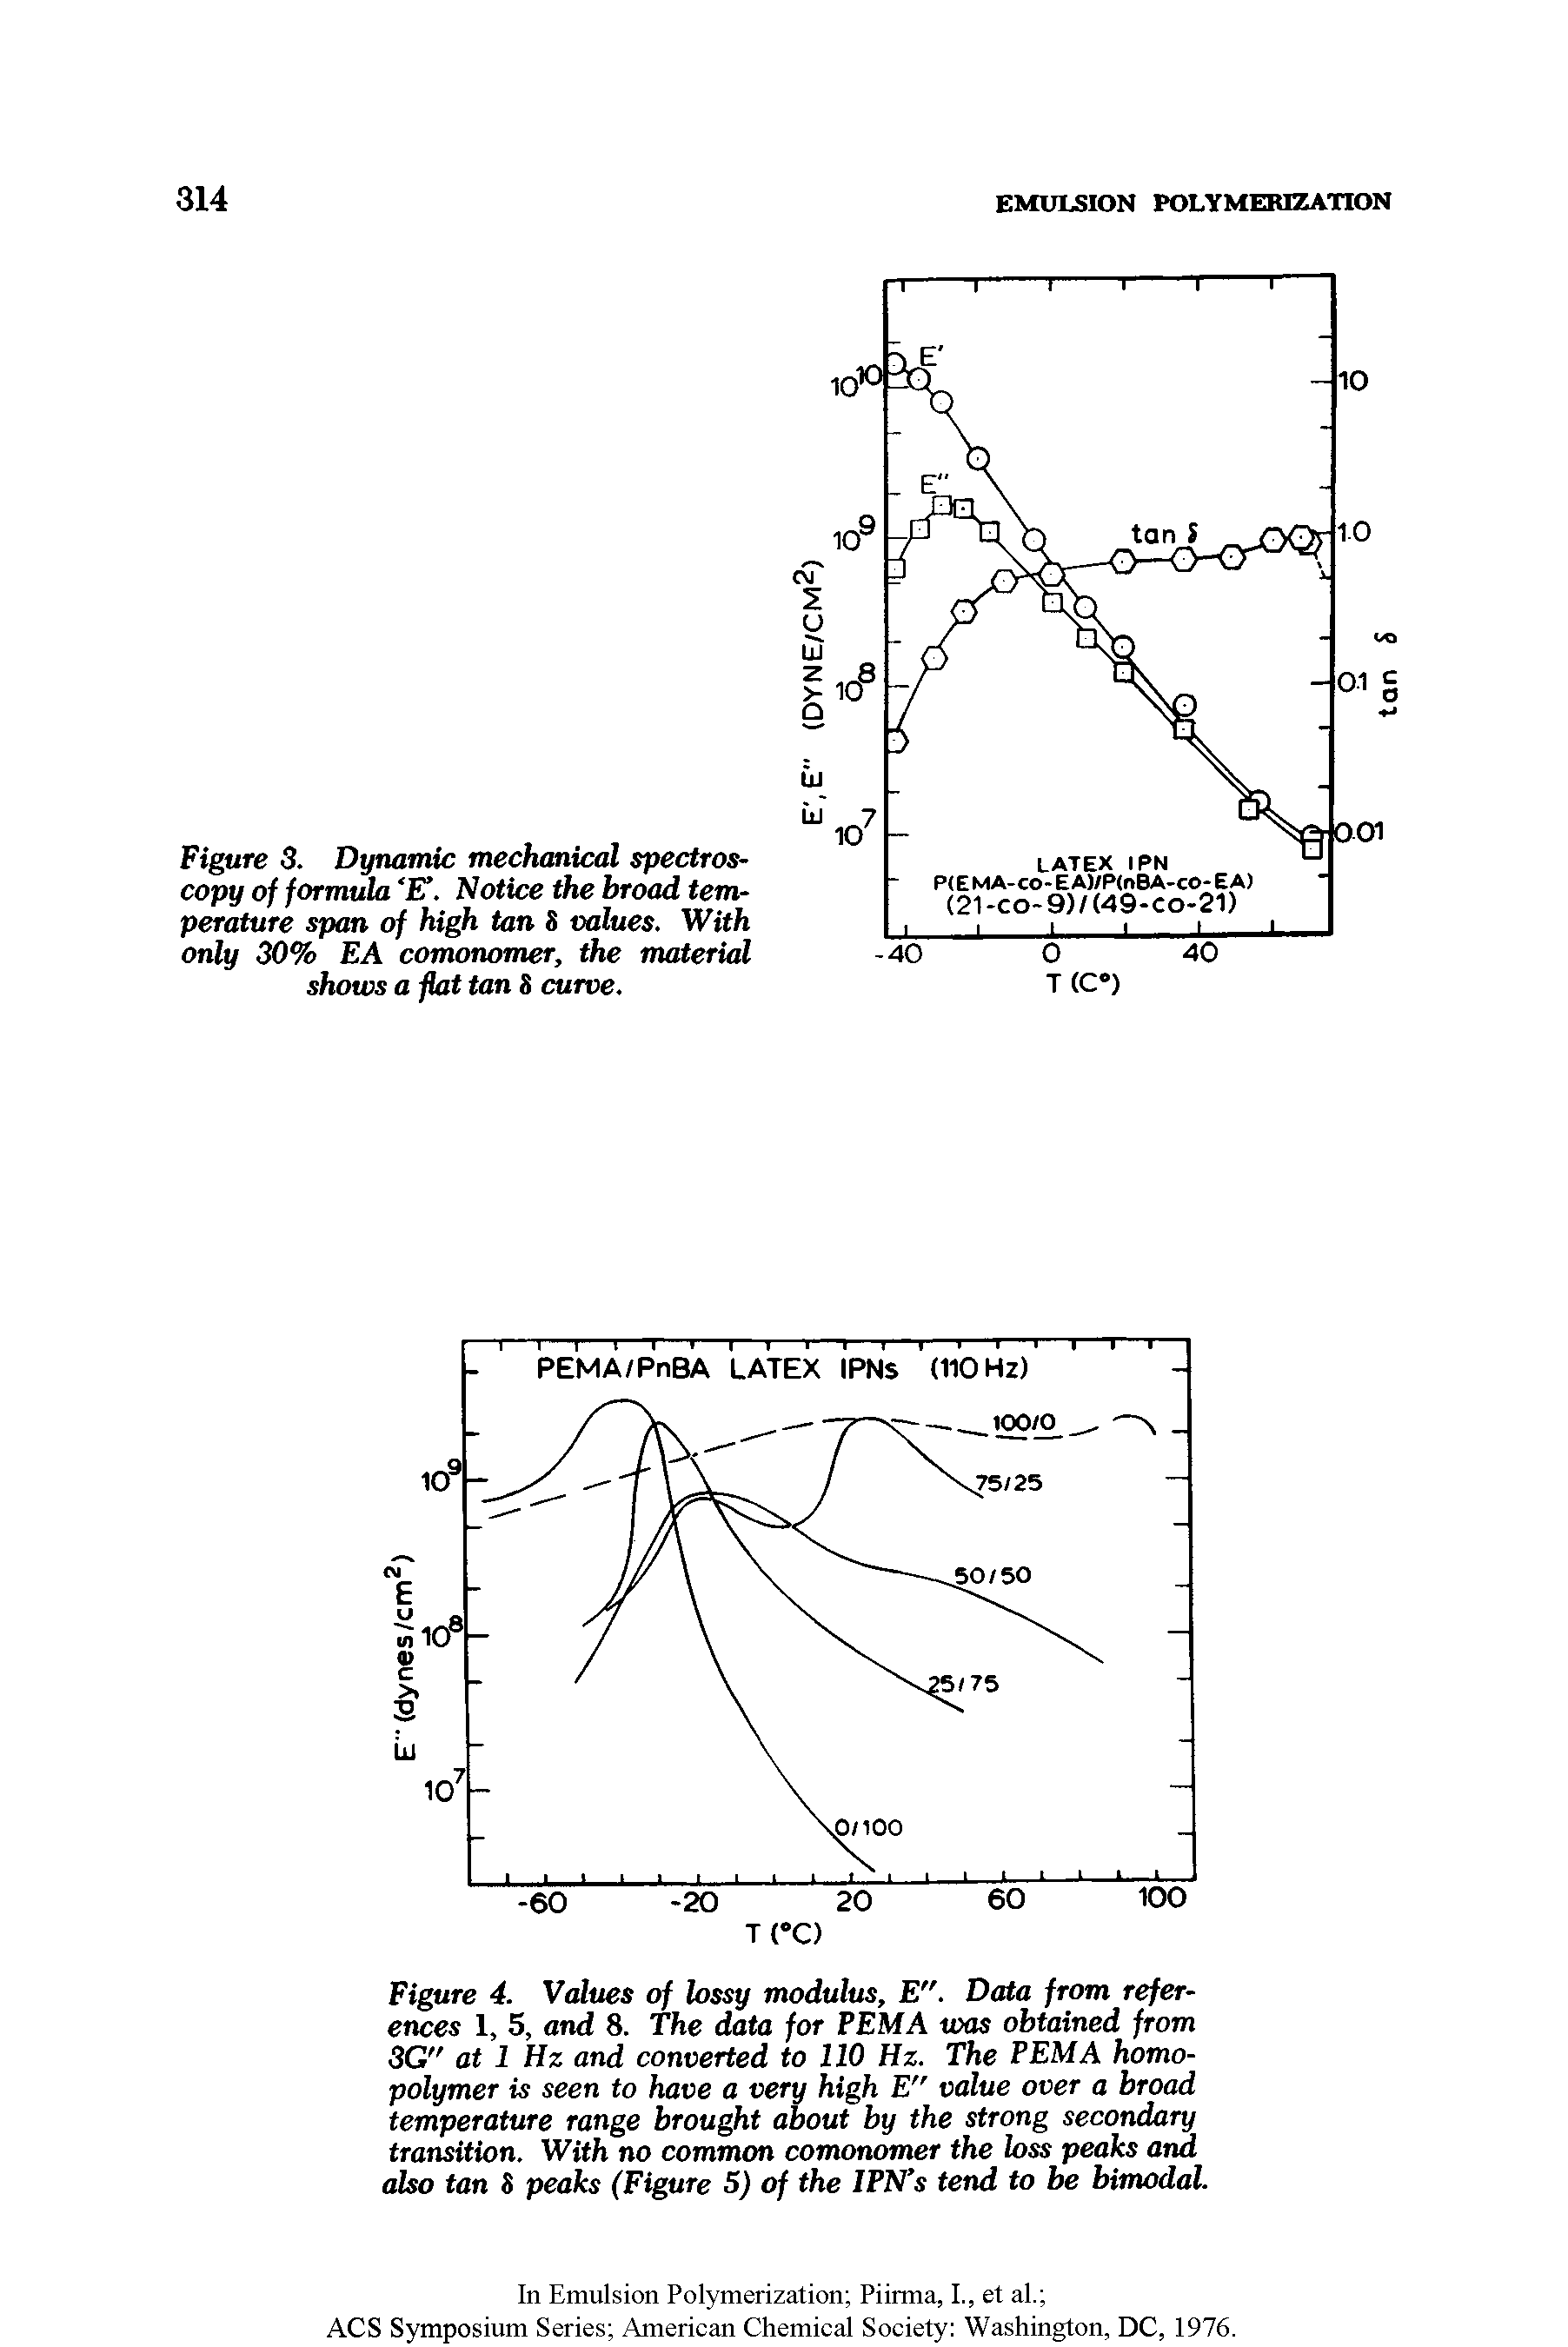 Figure 3. Dynamic mechanical spectroscopy of formula JET. Notice the broad temperature span of high tan S values. With only 30% EA comonomer, the material shows a fat tan S curve.